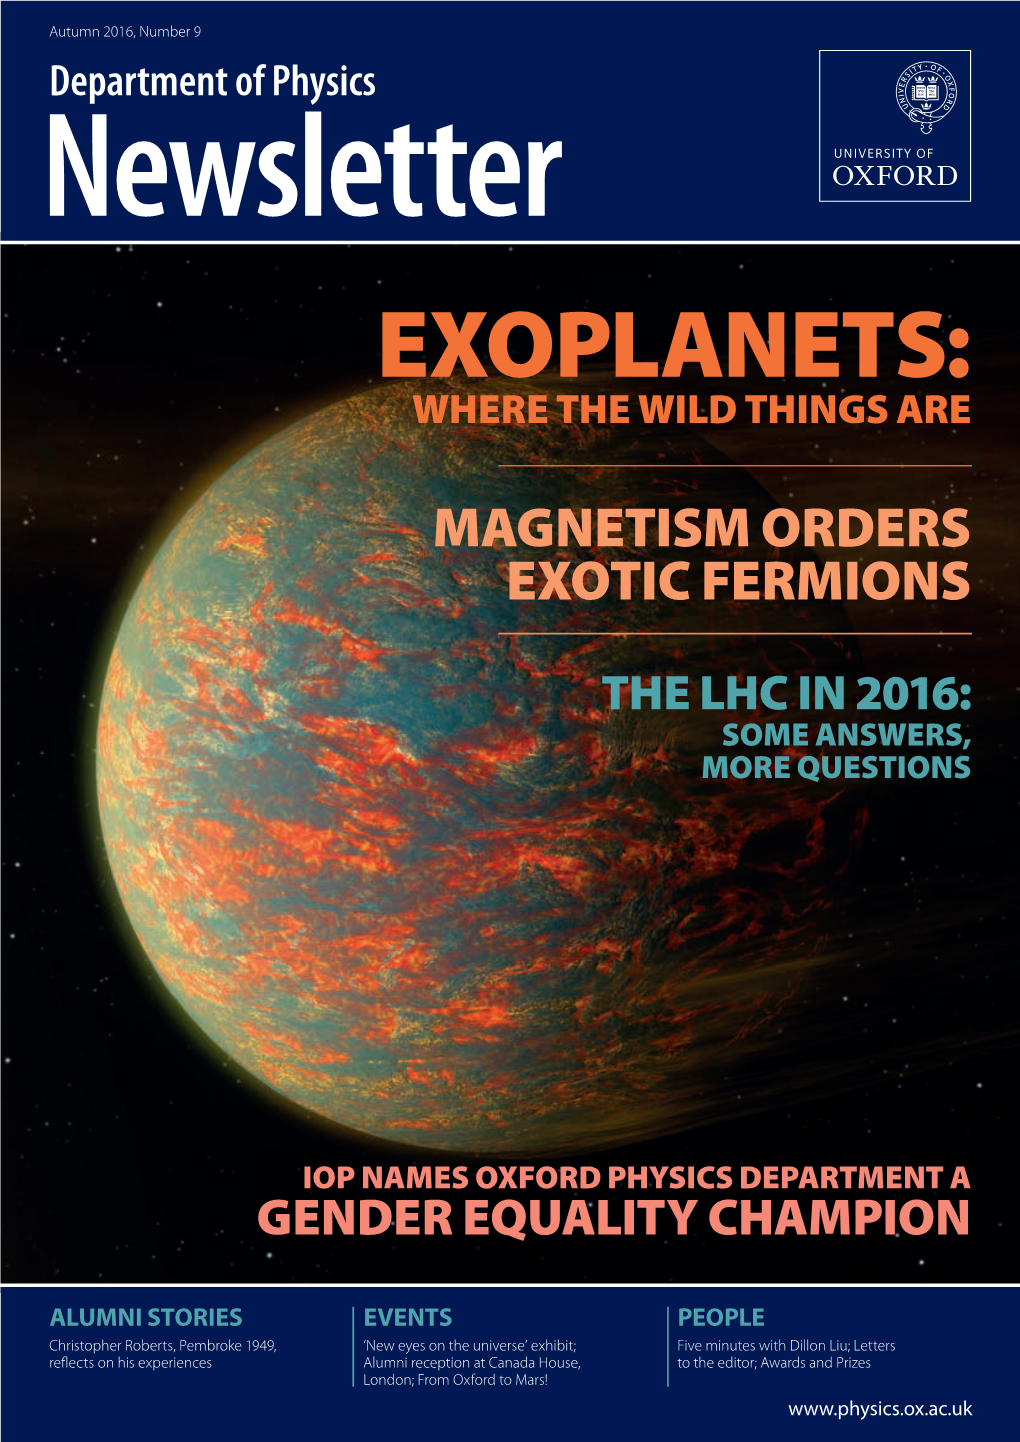 Exoplanets: Where the Wild Things Are